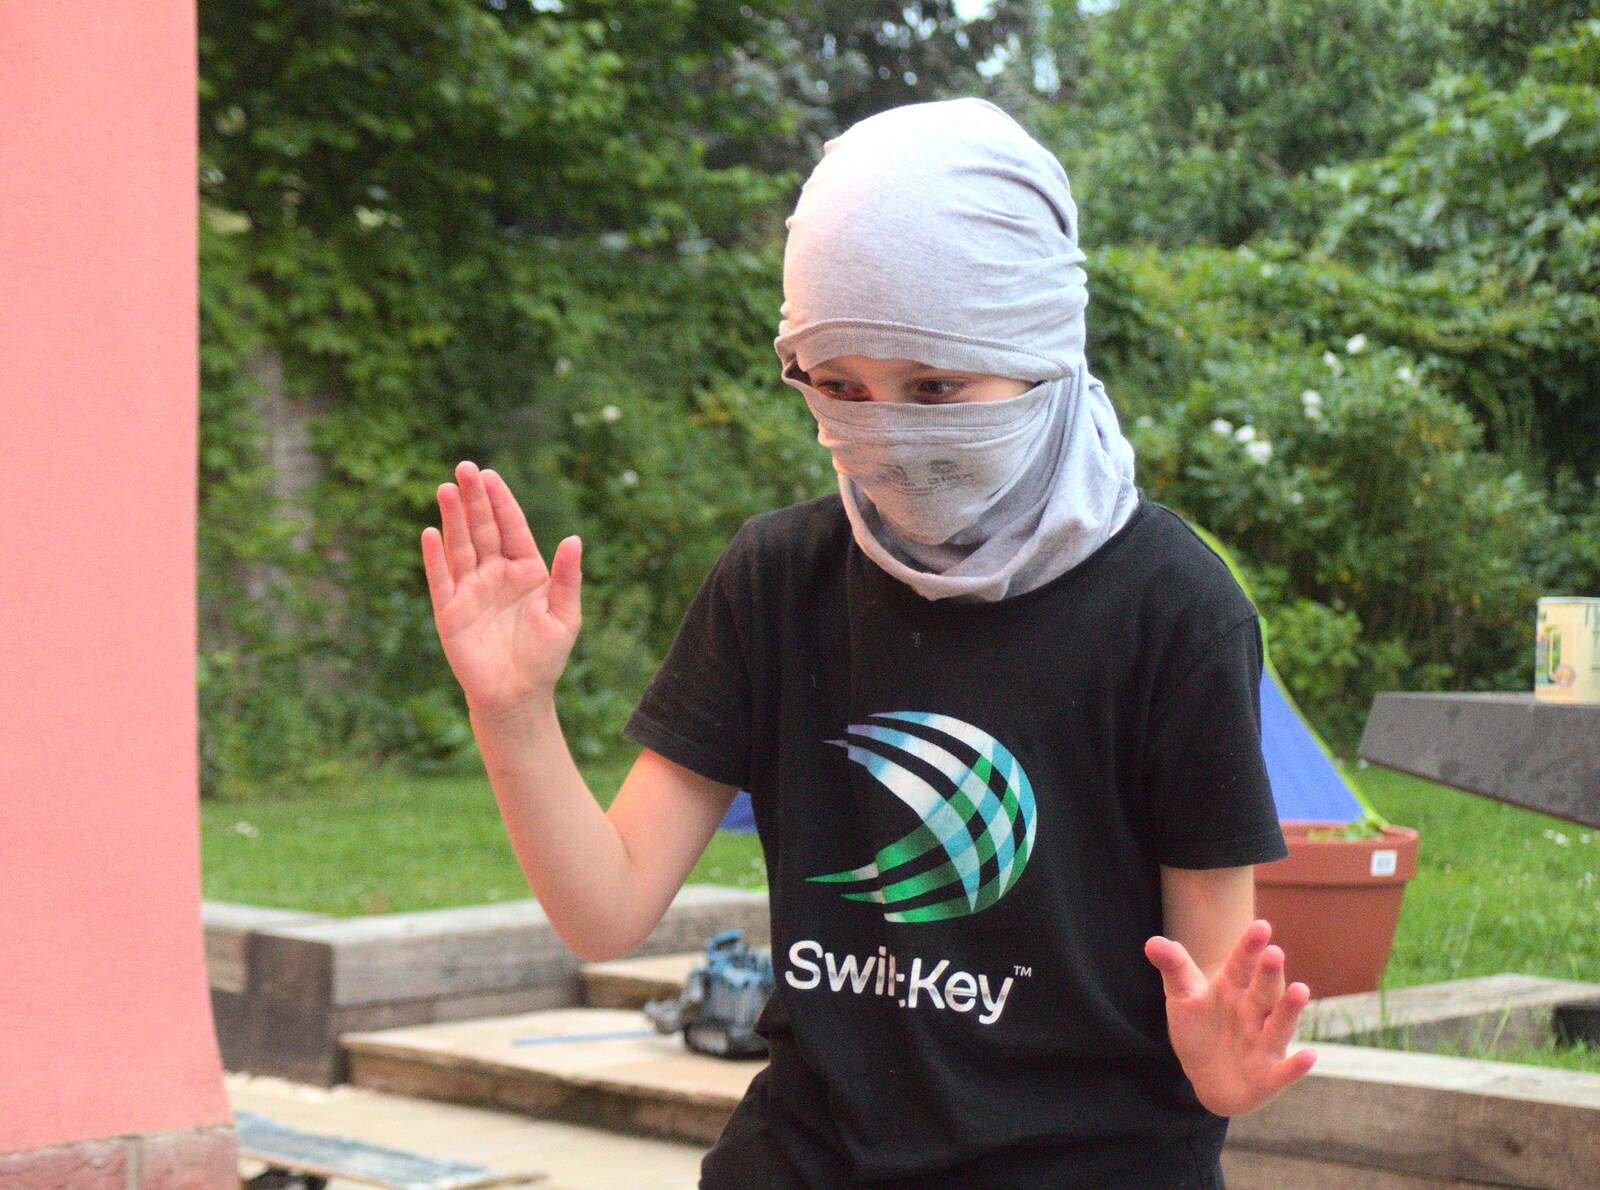 Fred dresses up as a Ninja from The Not-Opening of the Palgrave Playground, Palgrave, Suffolk - 3rd June 2018